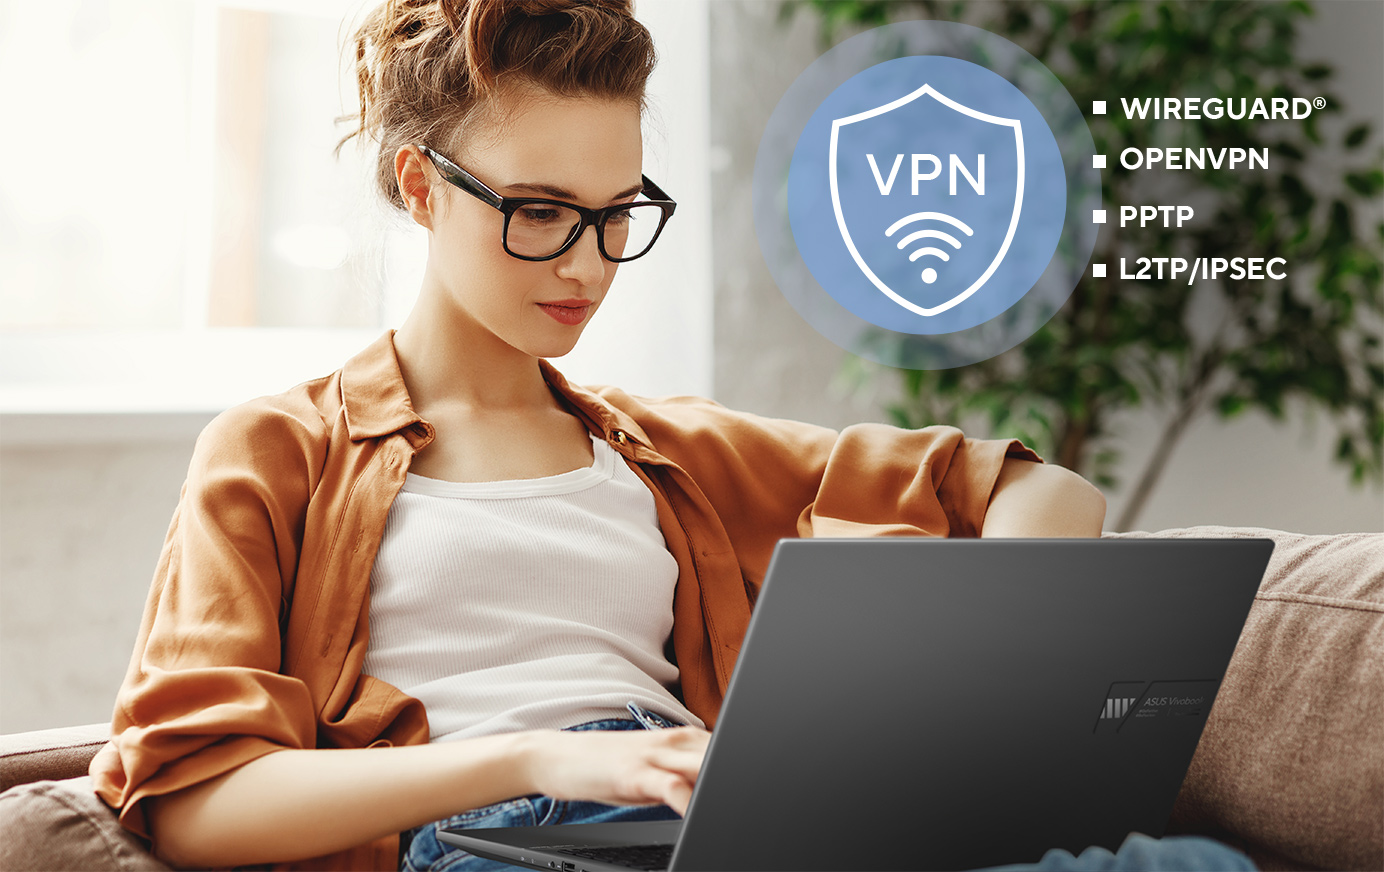 ASUS routers support a range of VPN security protocols, including WireGuard®, OpenVPN, PPTP, and L2TP/IPSec.